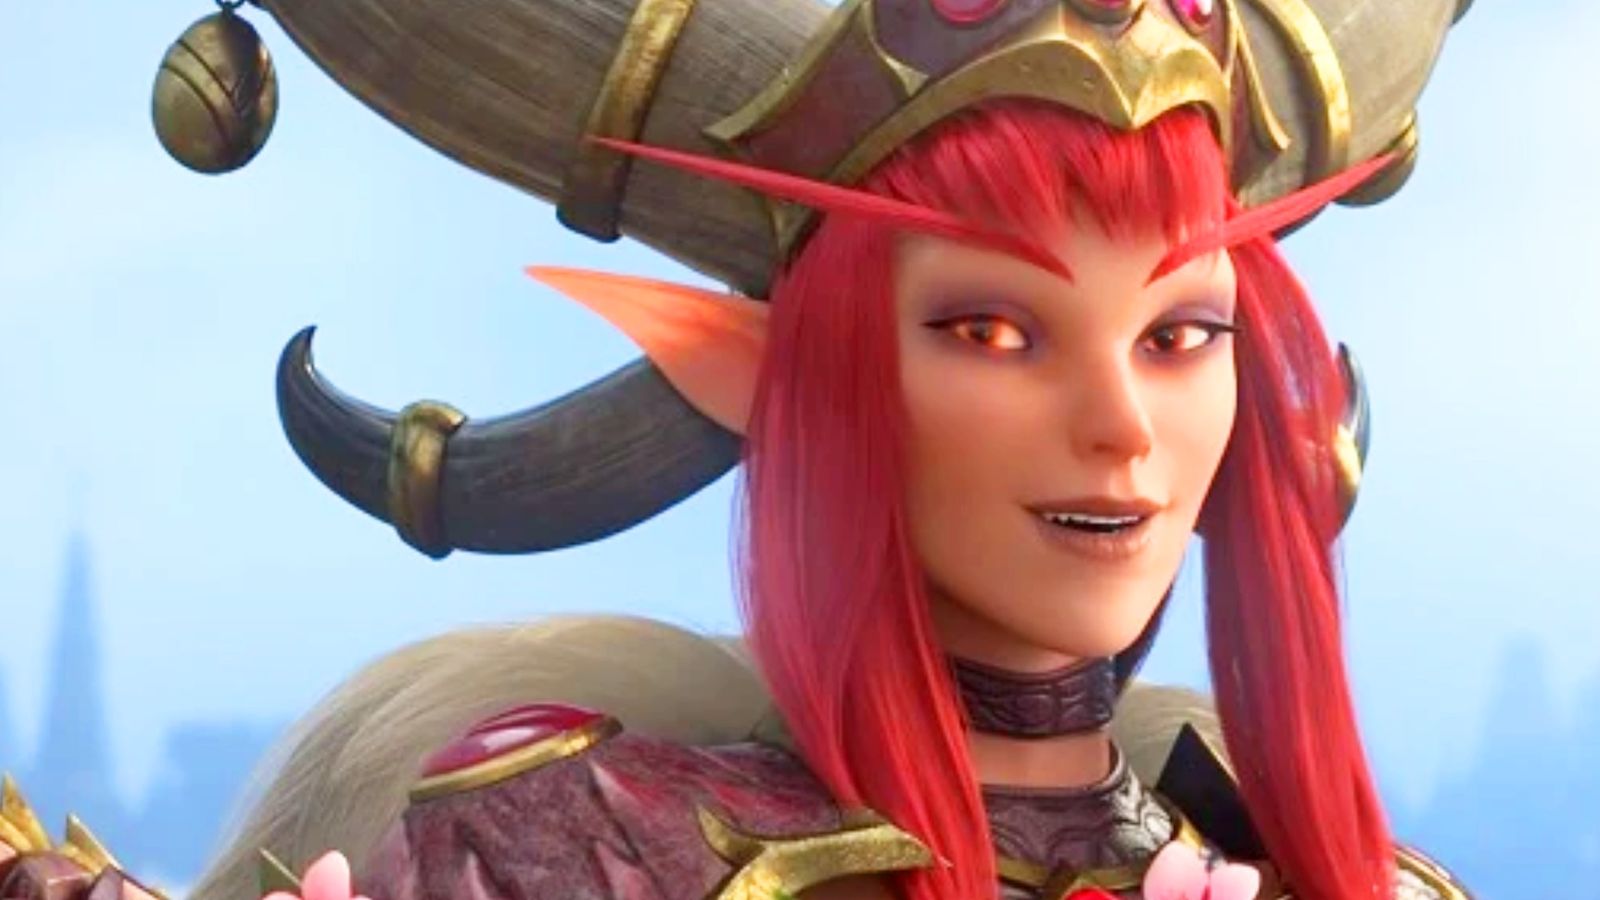 Alexstrasza the Life-Binder from World of Warcraft, a character you need to make sure gets sexual assault in a new quest 